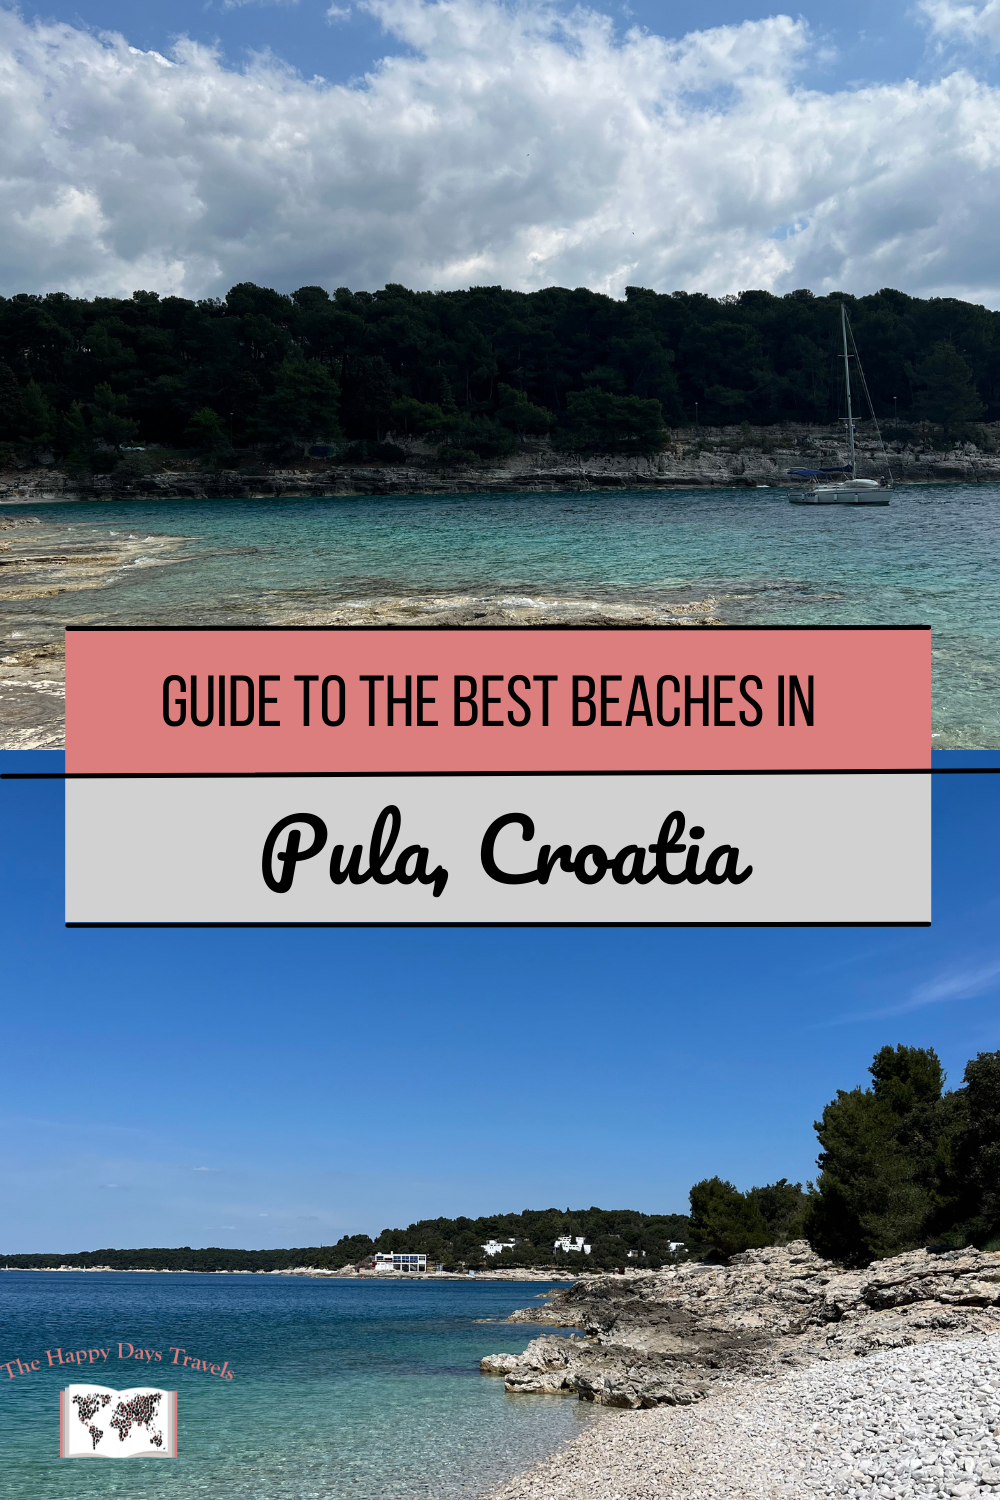 Pin Image for A Guide to the best beaches in Pula Croatia. Two images, top is of Valsaline Beach and bottom is Ambrela Beach.